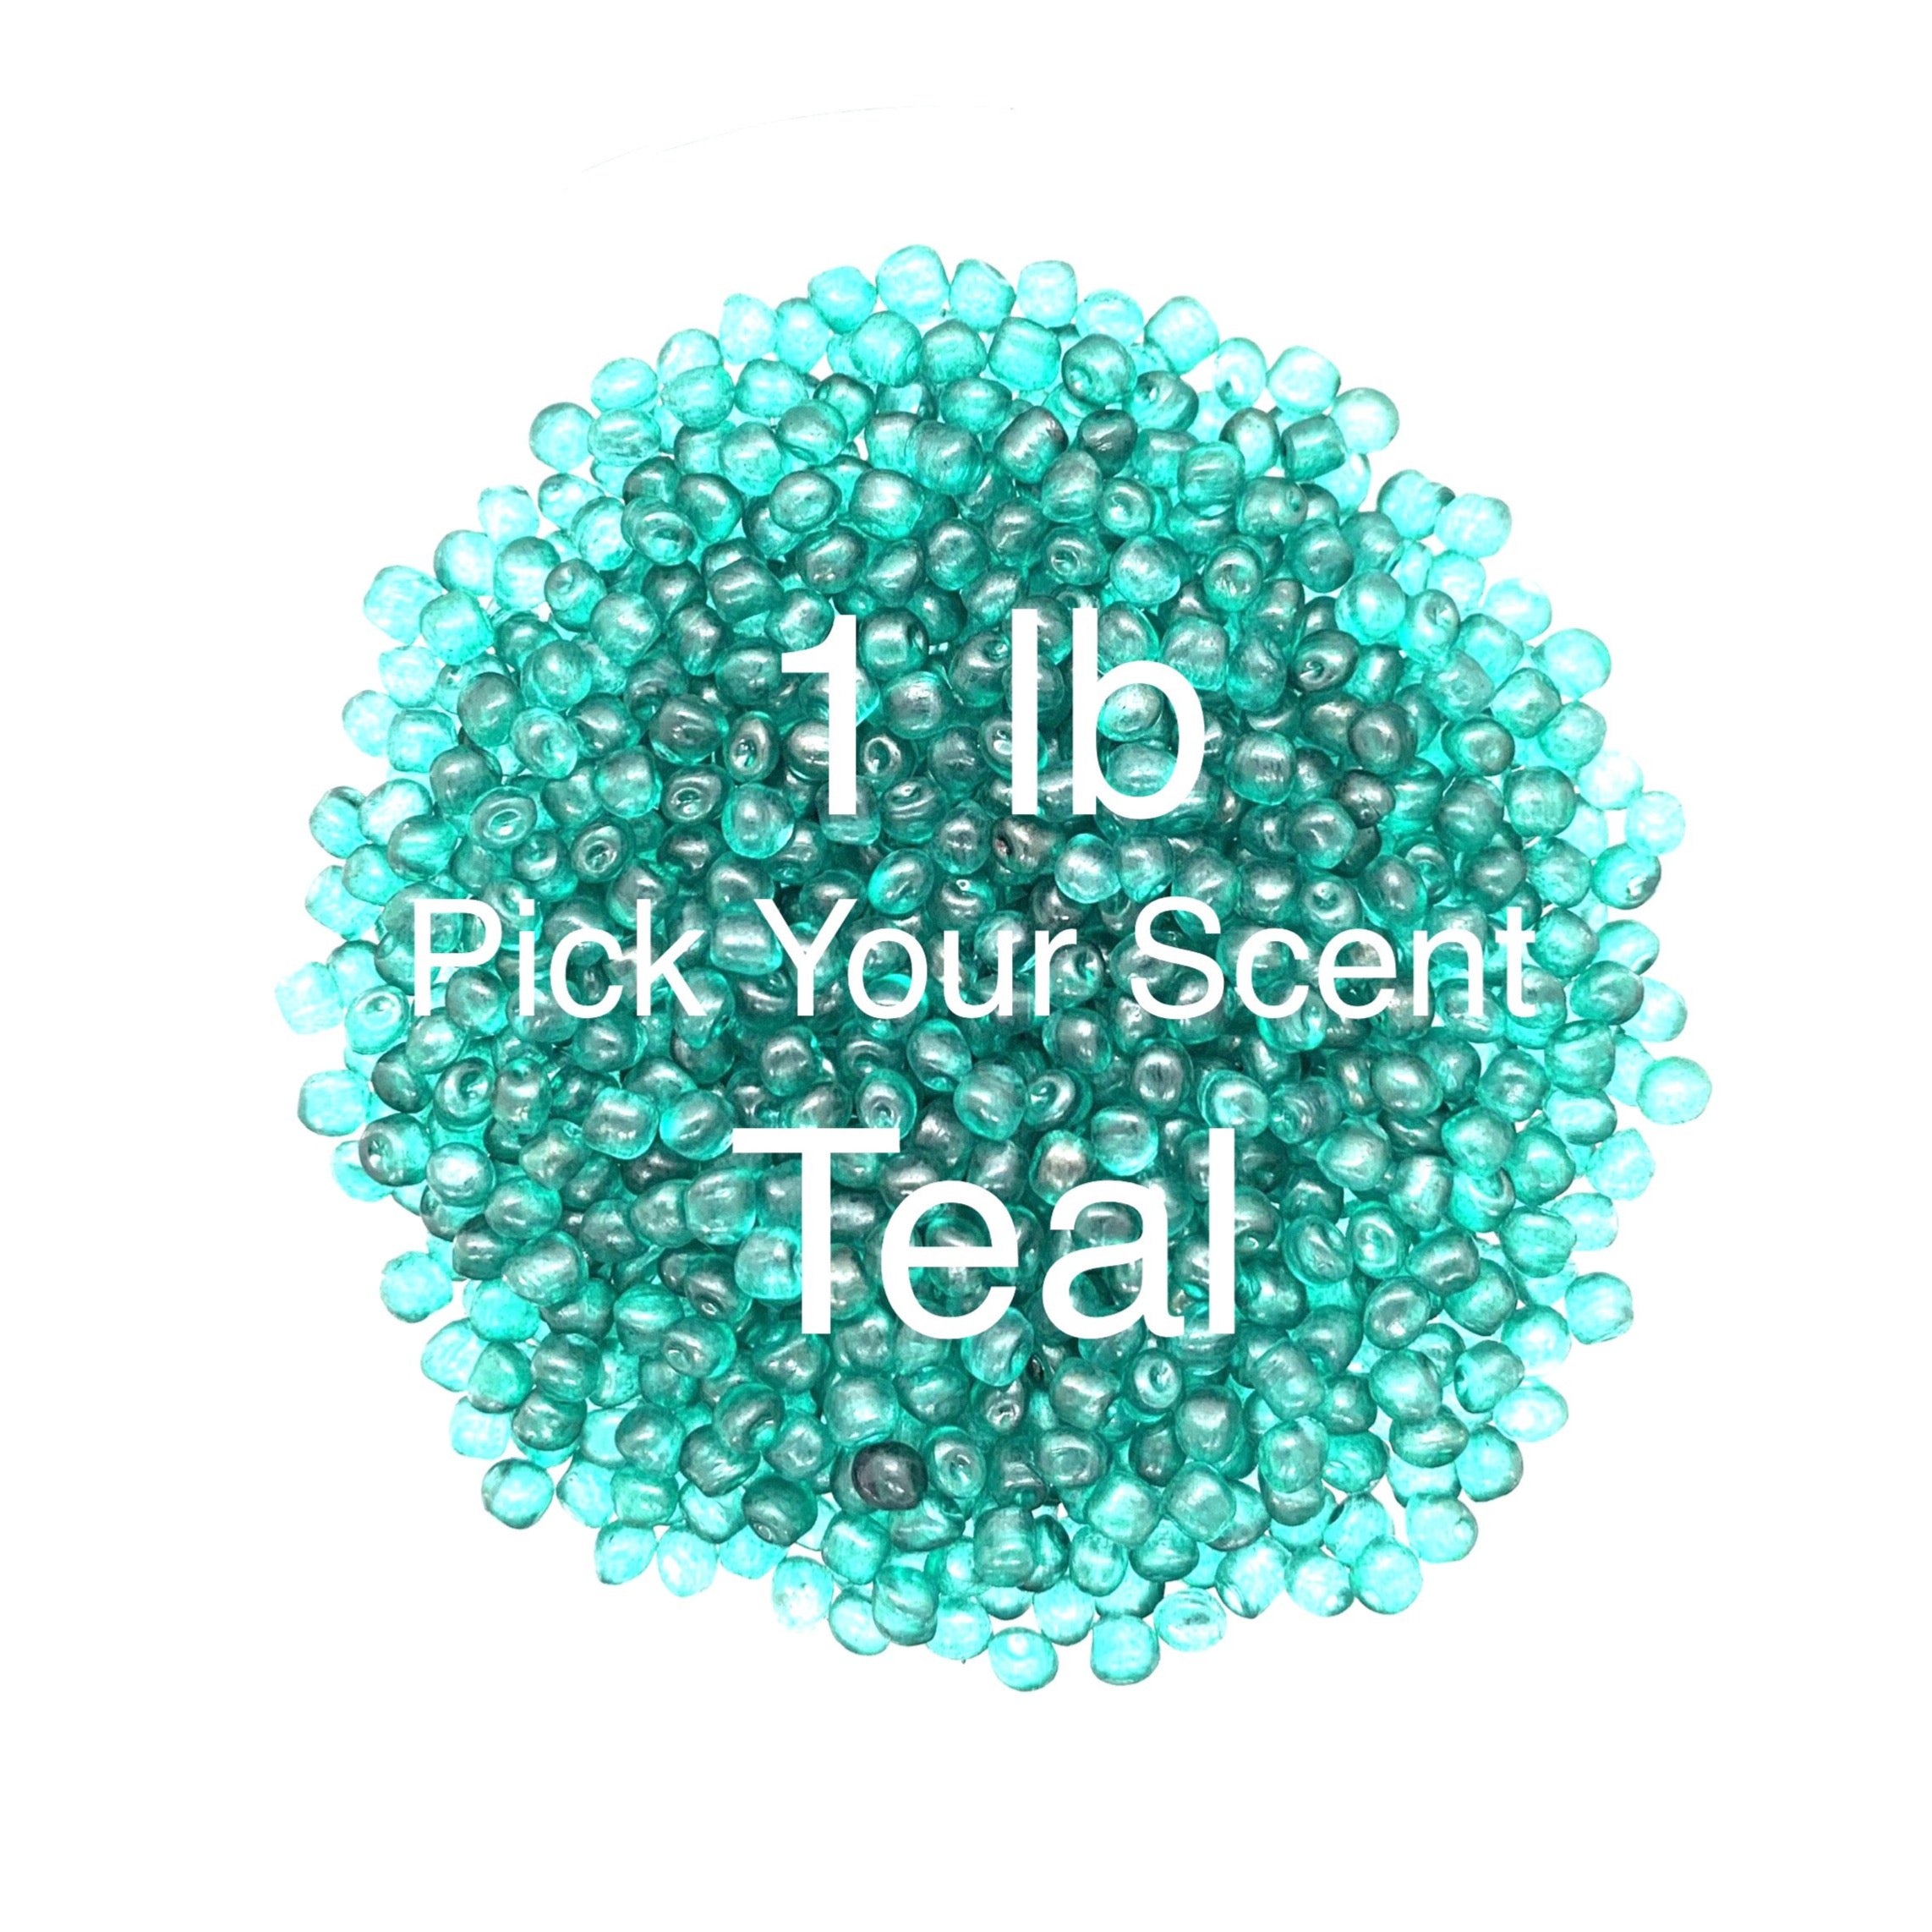 Unscented Aroma Beads for Making Air Freshener No Fragrance